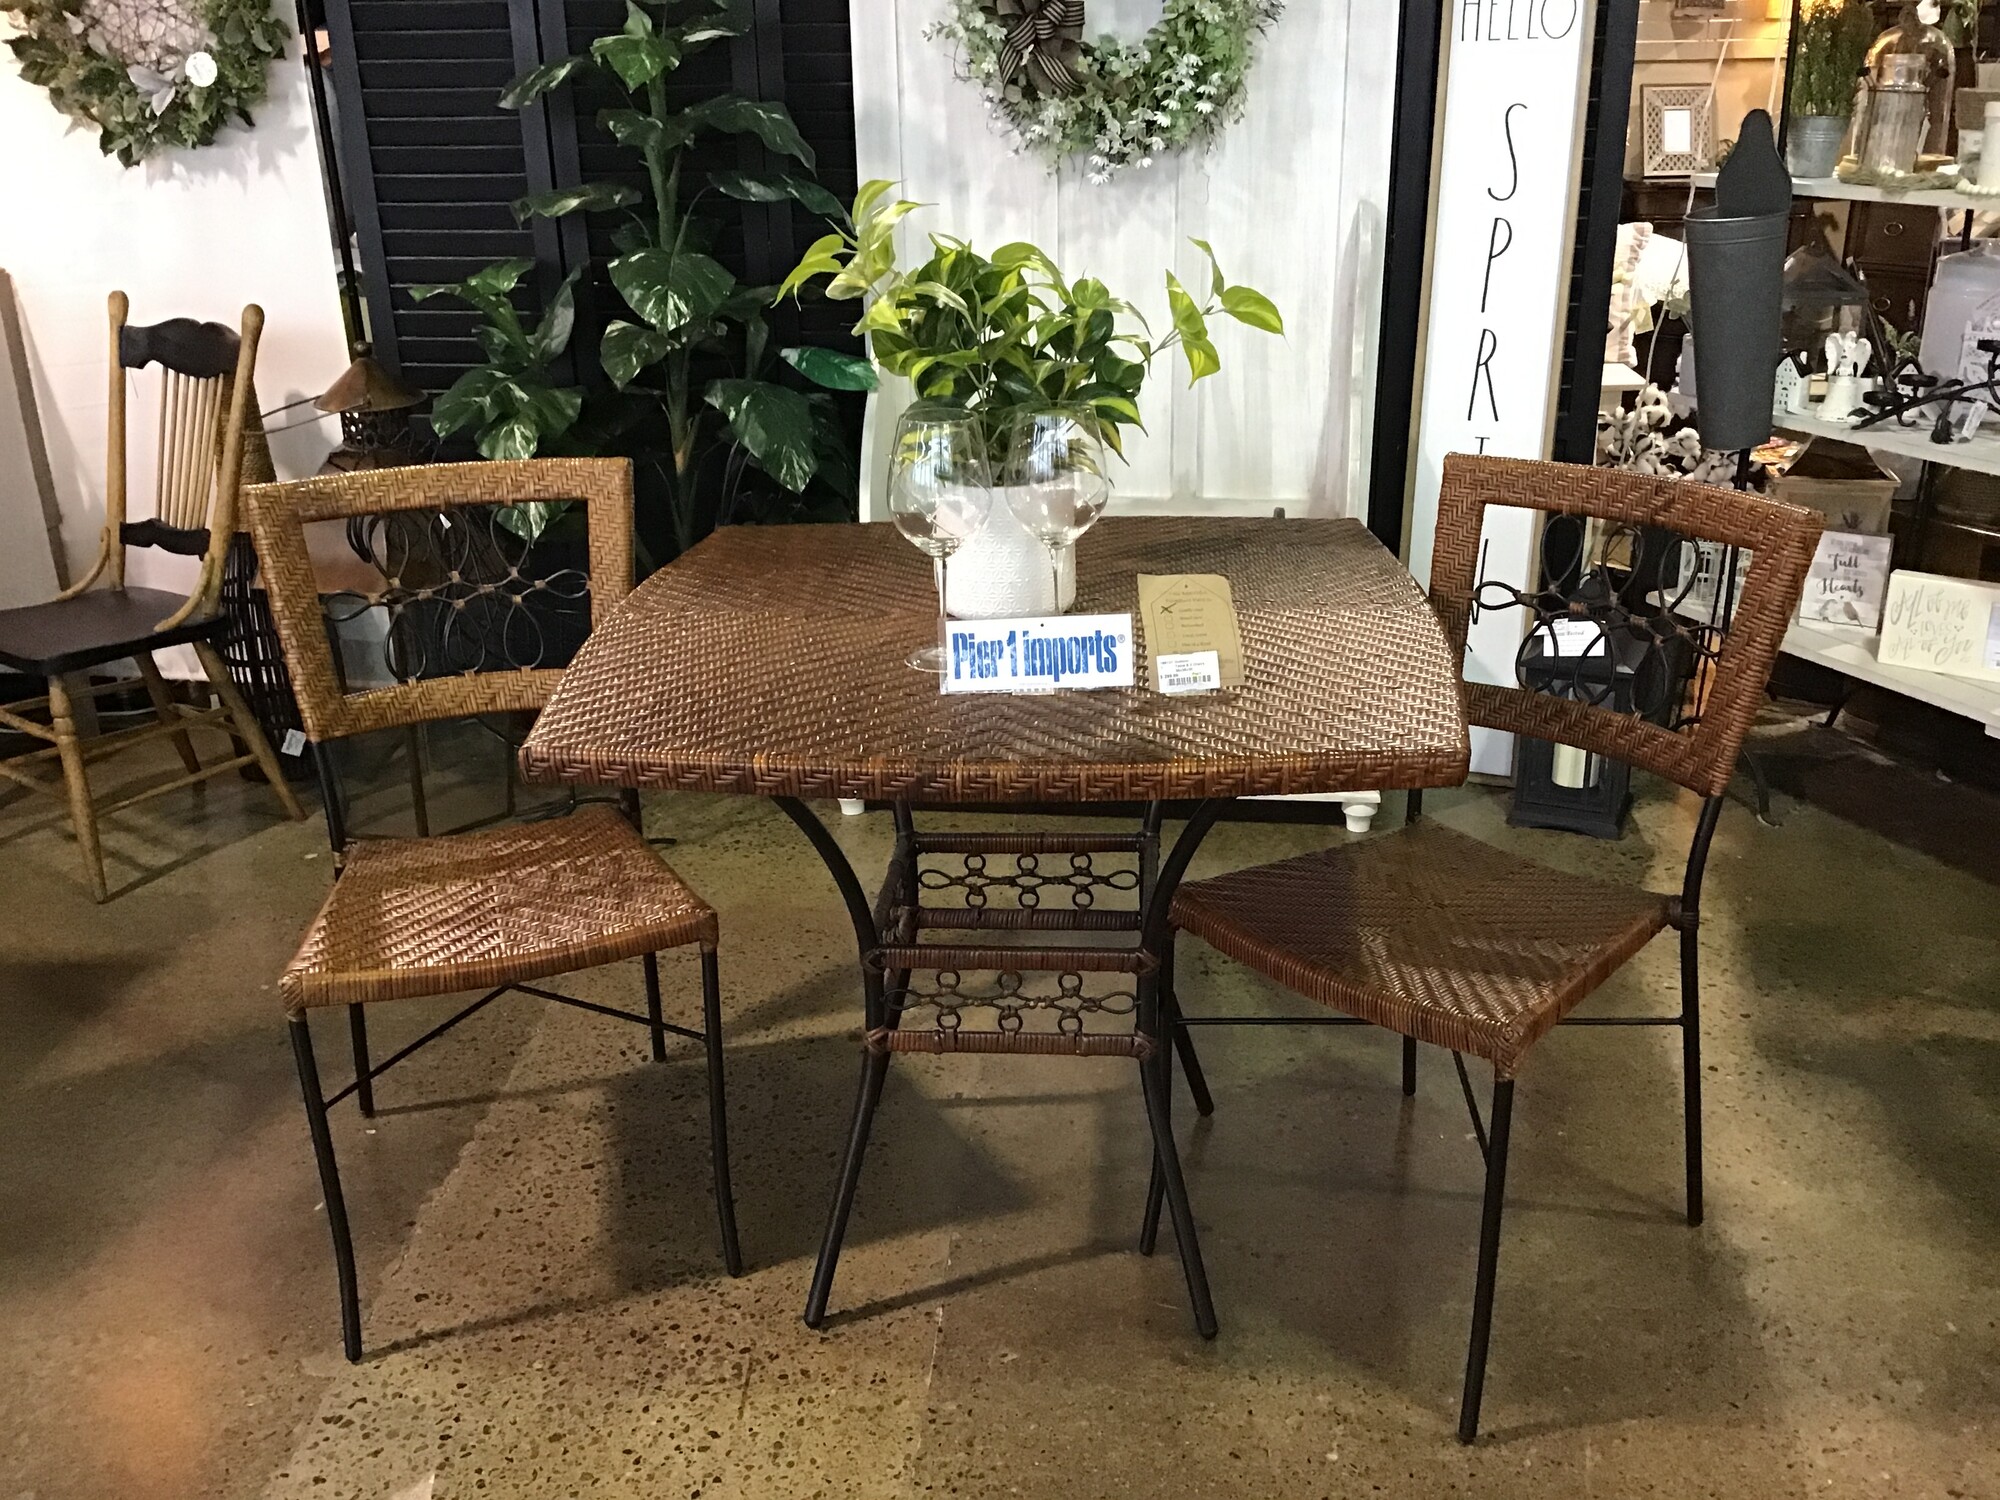 Pier 1
Rattan top Table w/ black metal legs
2 Chairs w/rattan seats and backs with black metal detailing and legs

Dimensions 35x35x30, Size: Pier1